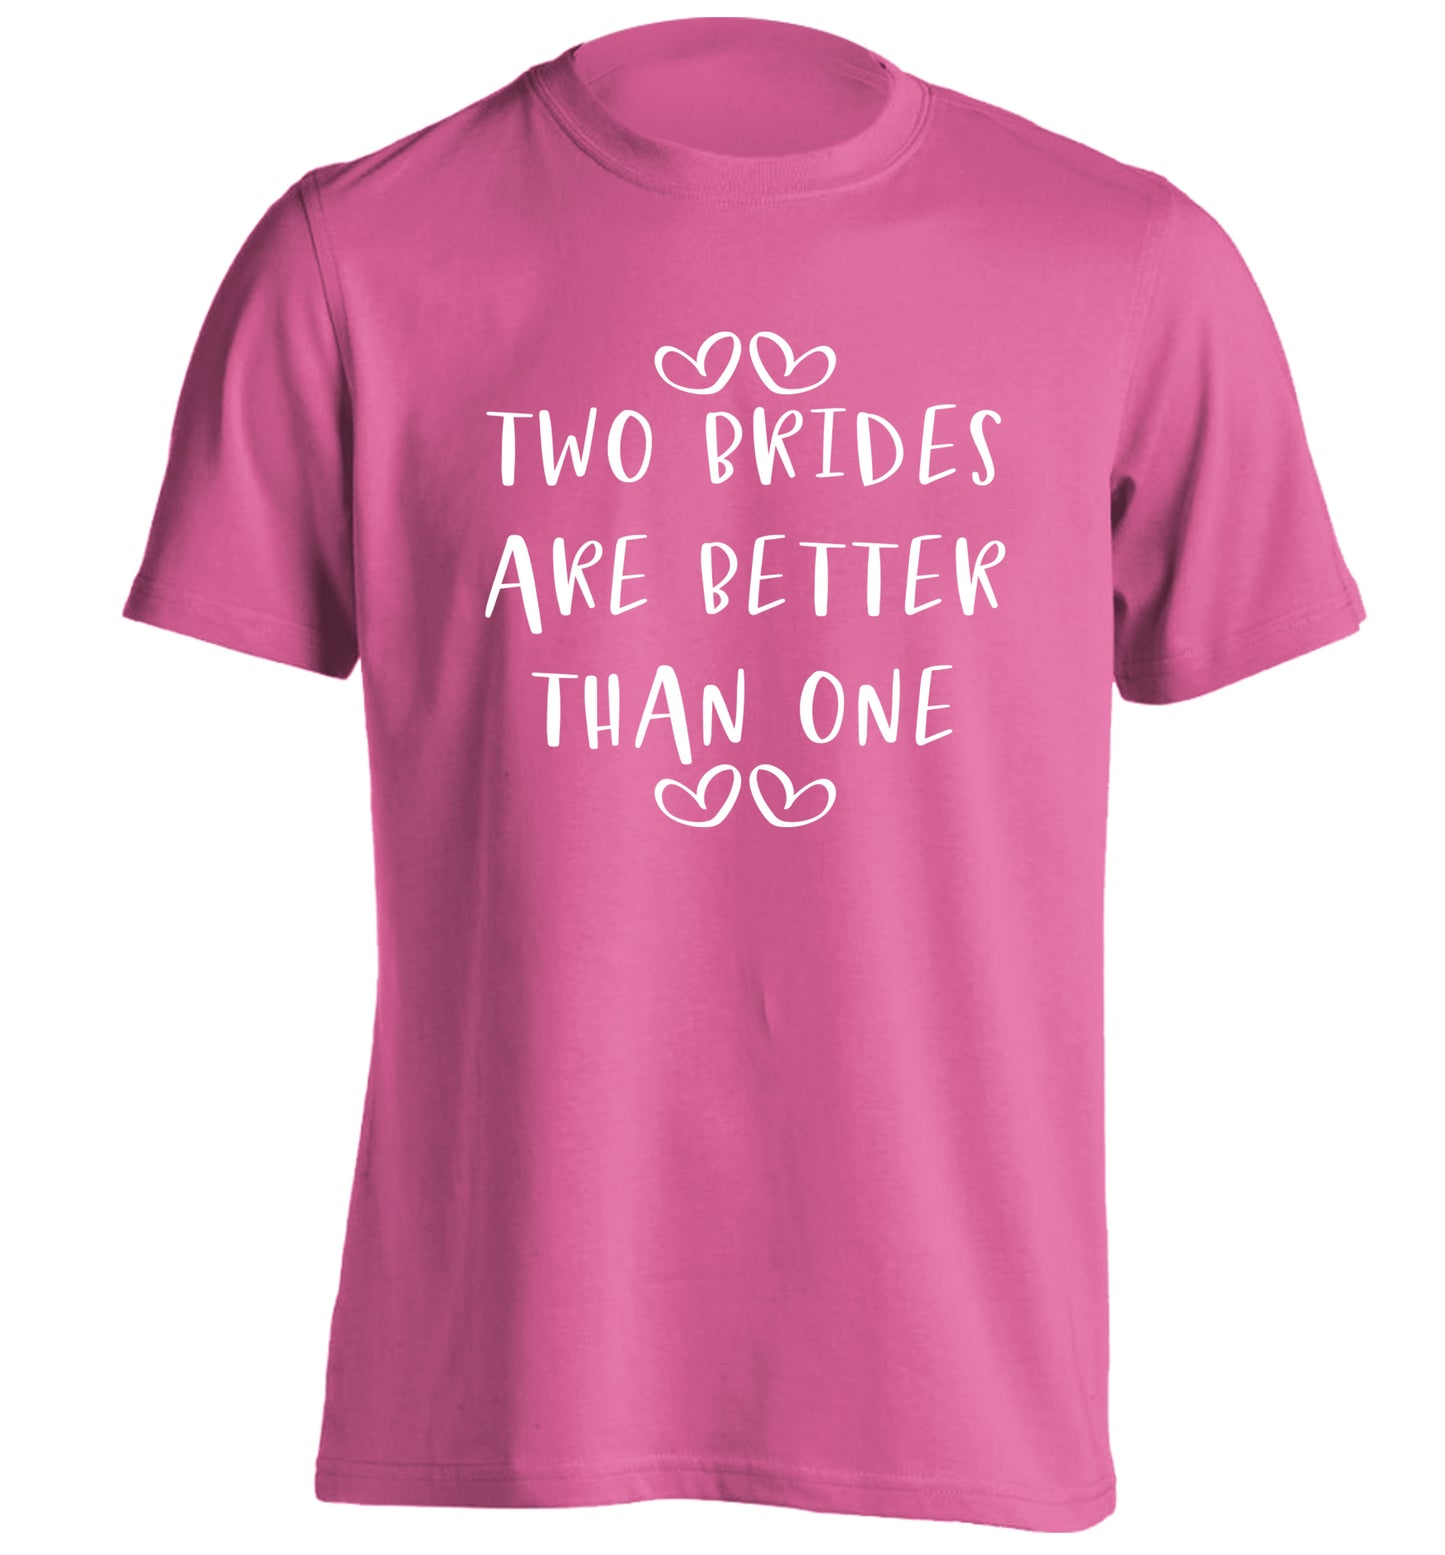 Two brides are better than one adults unisex pink Tshirt 2XL